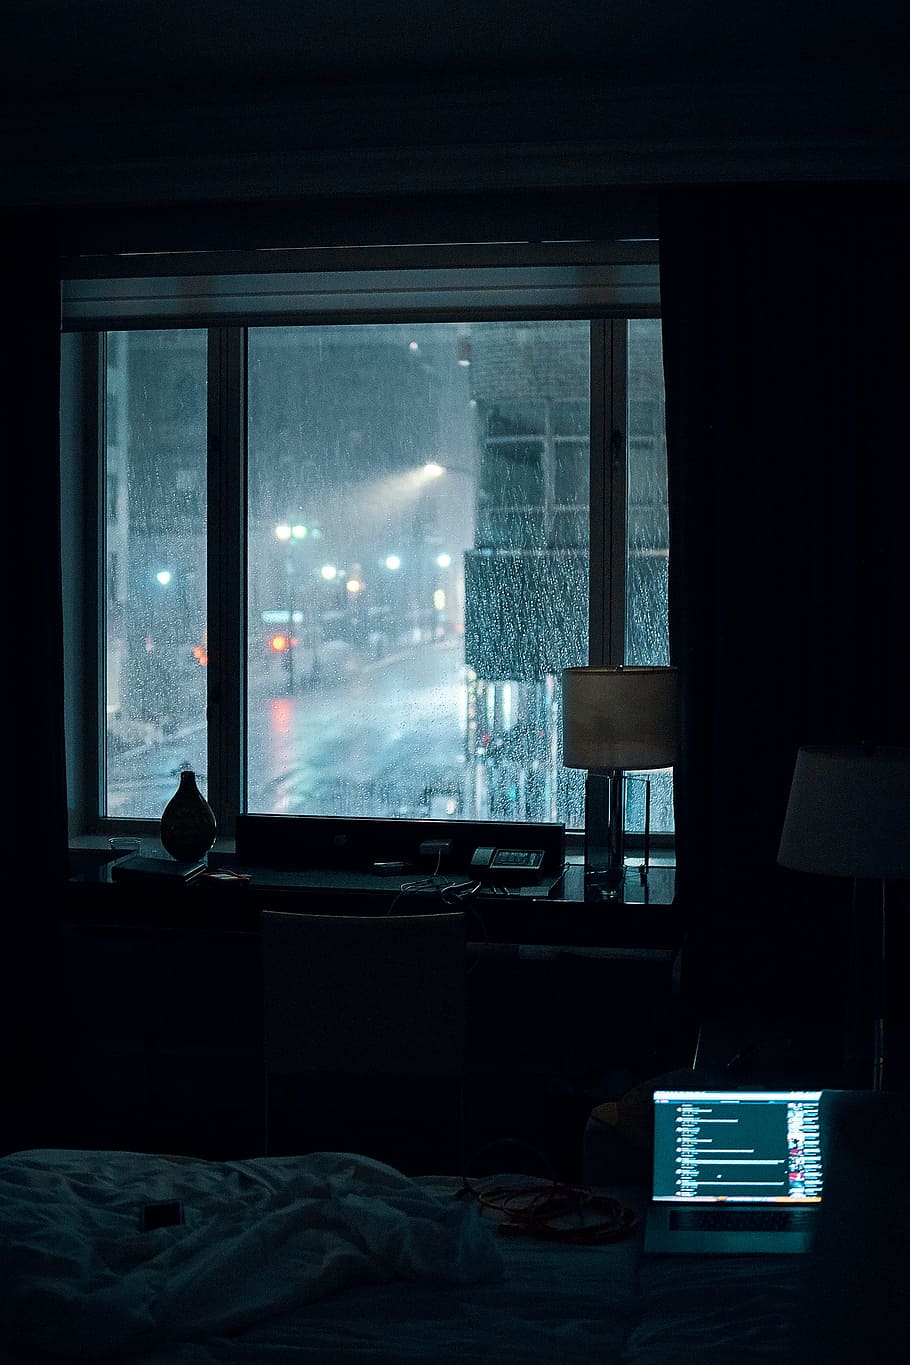 laptop computer left turned-on on bed inside room during rainy night